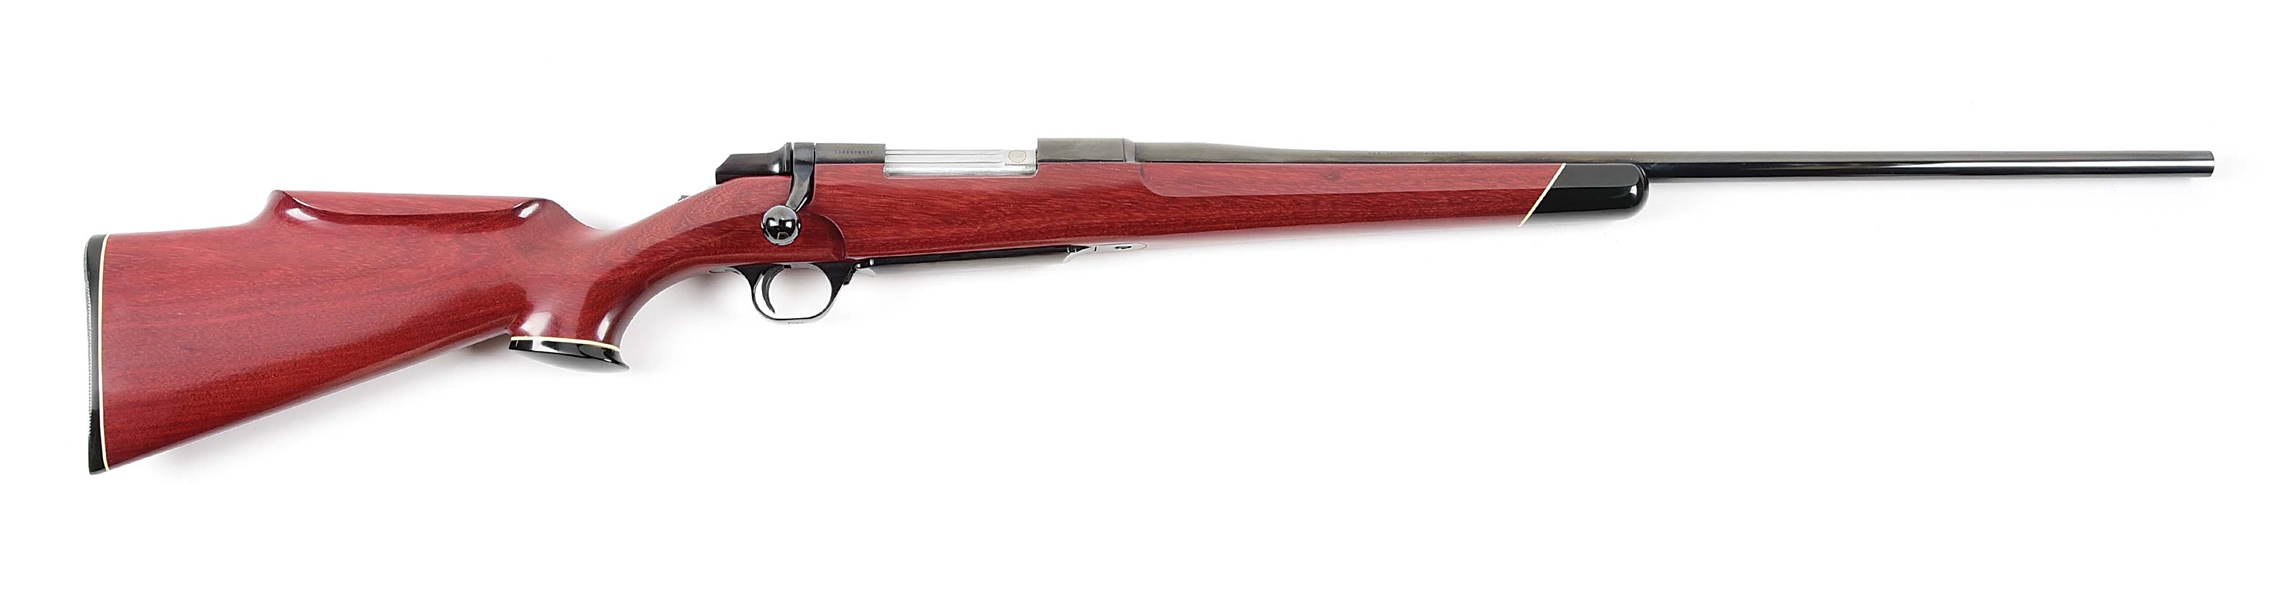 (M) BROWNING BBR BOLT ACTION RIFLE WITH PURPLE HEART/ PETOGYNE PANICULATE STOCK.